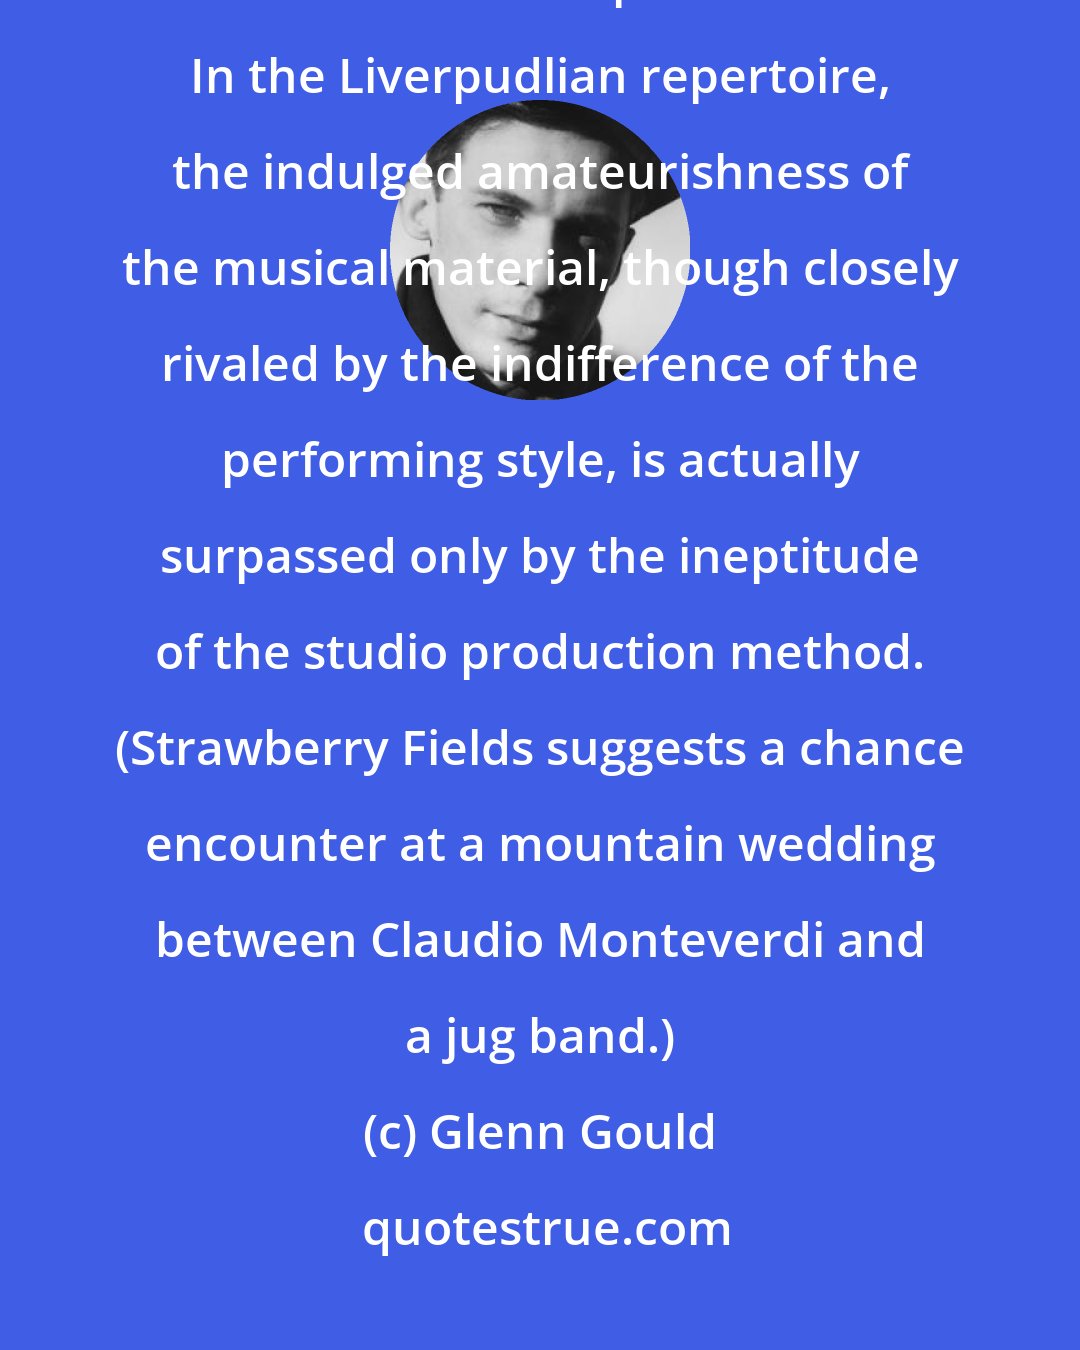 Glenn Gould: Theirs [the Beatles] is a happy, cocky, belligerently resourceless brand of harmonic primitivism... In the Liverpudlian repertoire, the indulged amateurishness of the musical material, though closely rivaled by the indifference of the performing style, is actually surpassed only by the ineptitude of the studio production method. (Strawberry Fields suggests a chance encounter at a mountain wedding between Claudio Monteverdi and a jug band.)